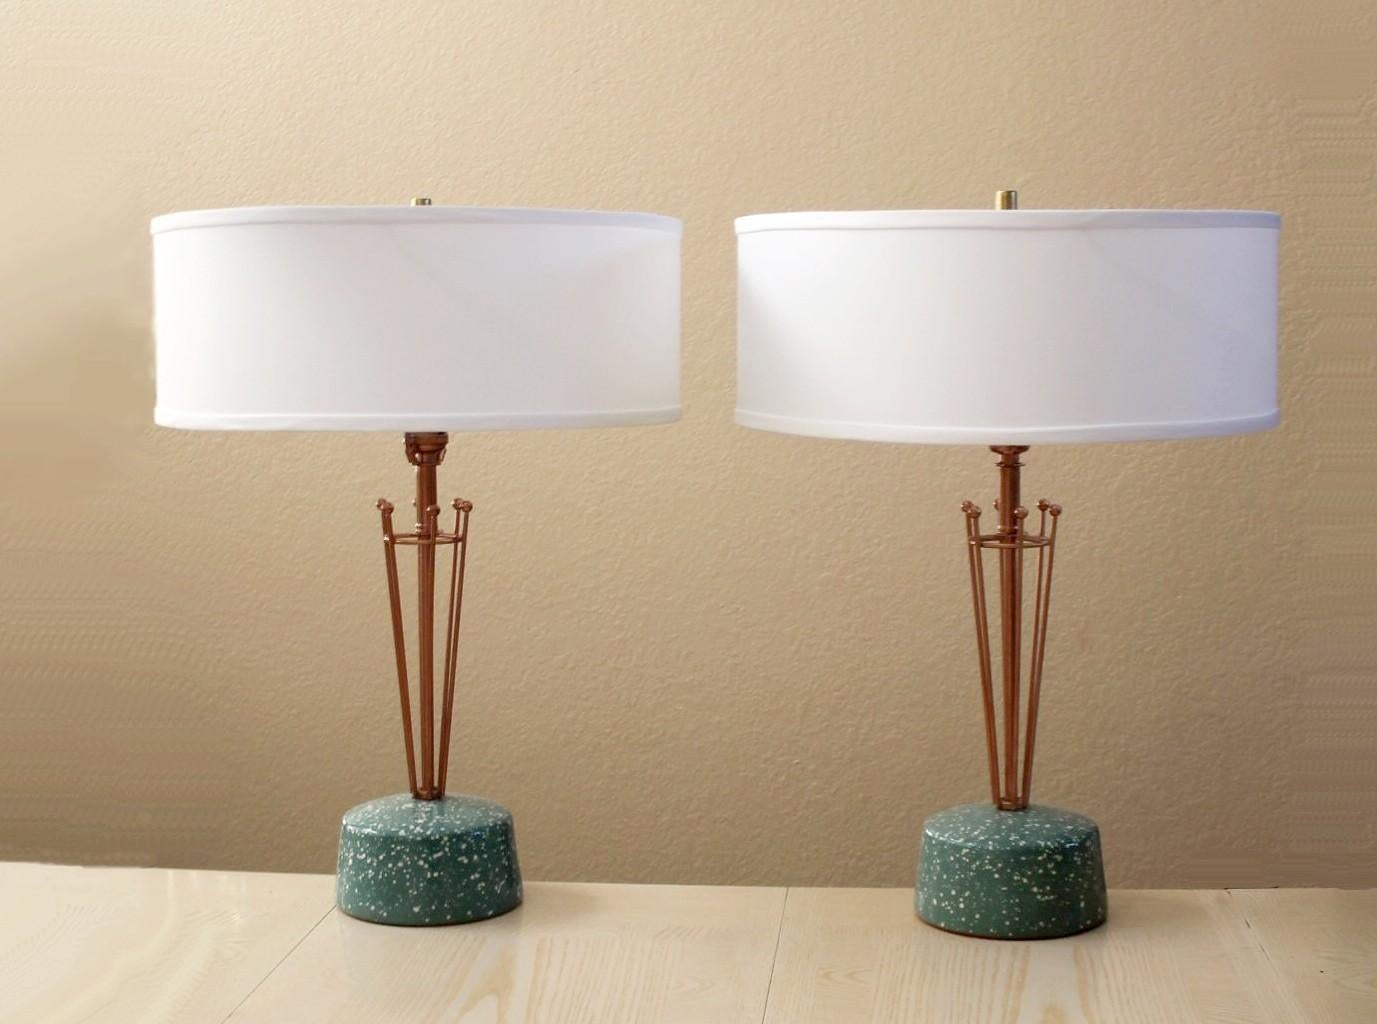 MAGNIFICENT!

Spectacularly Rare Pair

Raymor Mid Century Modern
Atomic Pottery & Metal
Table Lamps

Stunning Turquoise & Copper Hues!

Here is a fabulous pair of mid century modern lamps that merge fine pottery with atomic age flourishes to create